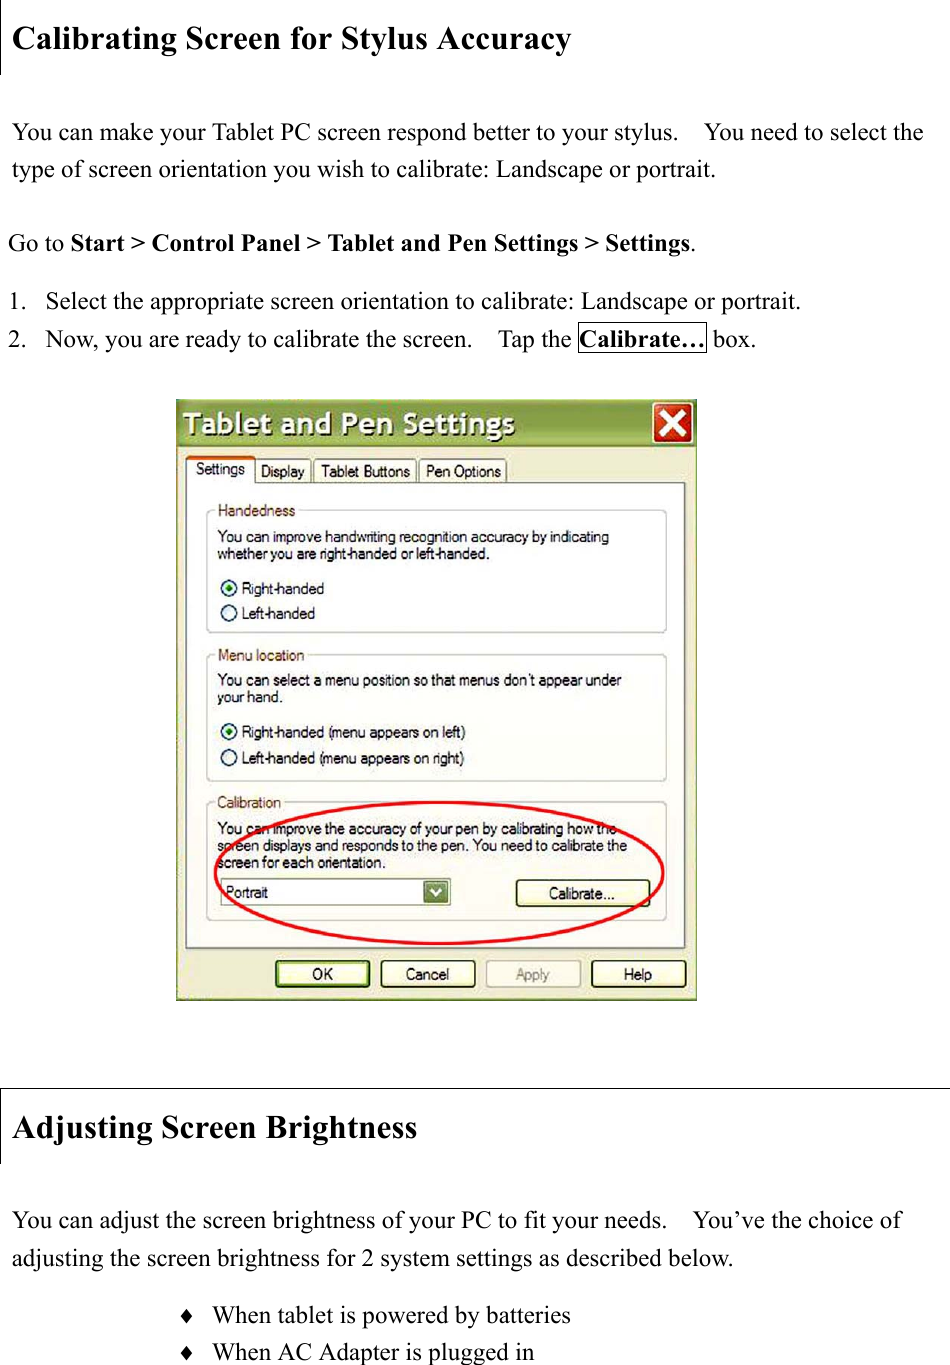 Calibrating Screen for Stylus Accuracy You can make your Tablet PC screen respond better to your stylus.    You need to select the type of screen orientation you wish to calibrate: Landscape or portrait. Adjusting Screen Brightness You can adjust the screen brightness of your PC to fit your needs.    You’ve the choice of adjusting the screen brightness for 2 system settings as described below.   i When tablet is powered by batteries i When AC Adapter is plugged in Go to Start &gt; Control Panel &gt; Tablet and Pen Settings &gt; Settings.1.  Select the appropriate screen orientation to calibrate: Landscape or portrait.   2.  Now, you are ready to calibrate the screen.    Tap the Calibrate… box. 